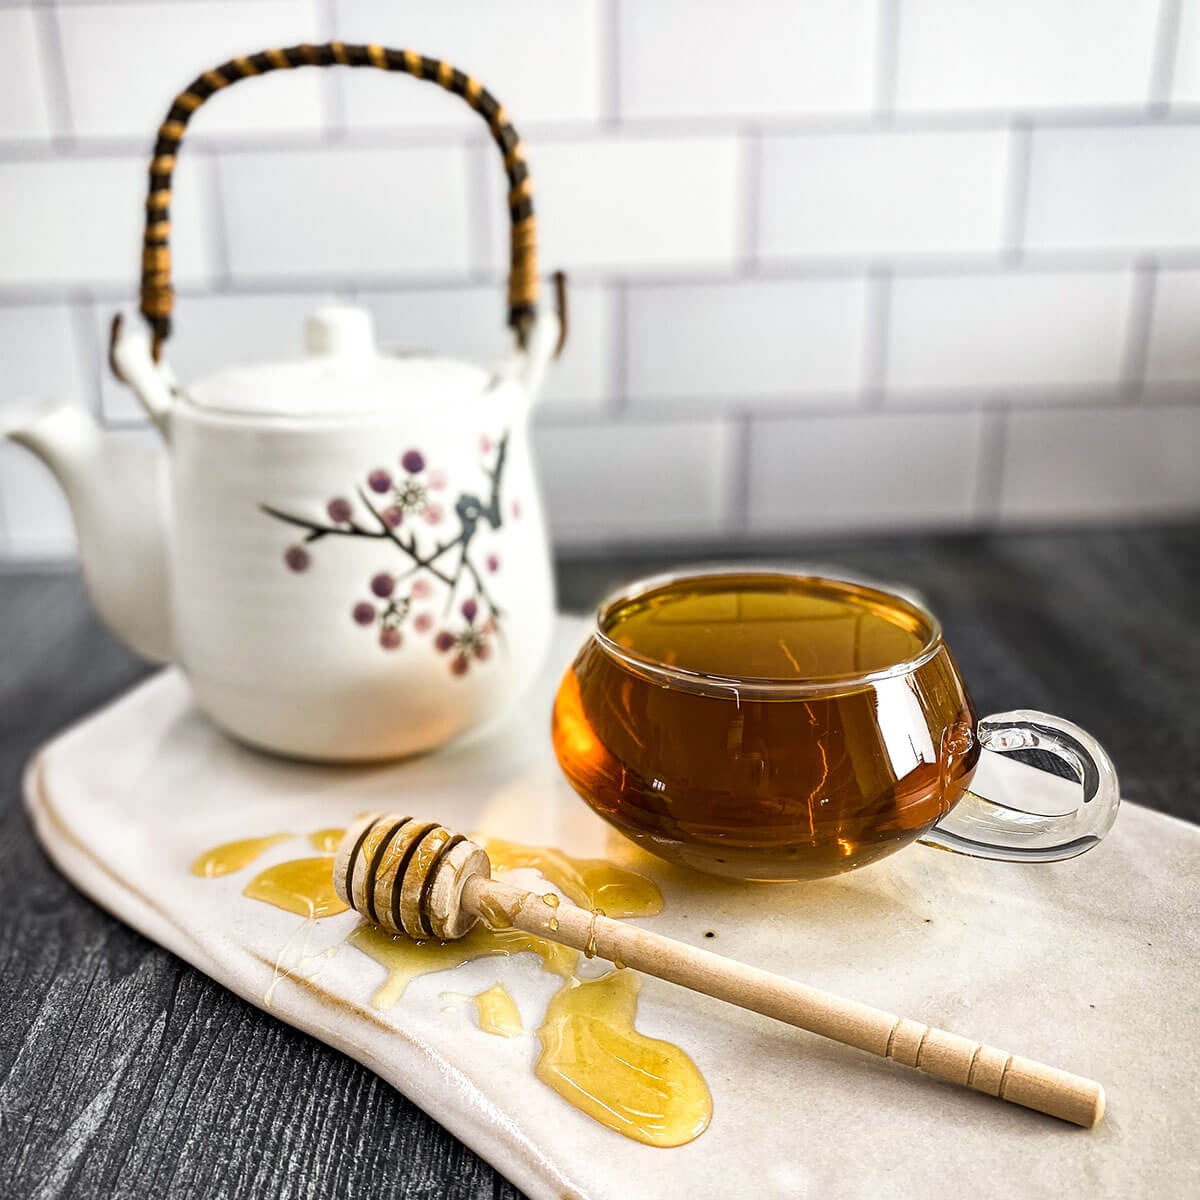 A glass mug of brewed Cold Comfort tea on a counter with a white tea pot and honey wand.